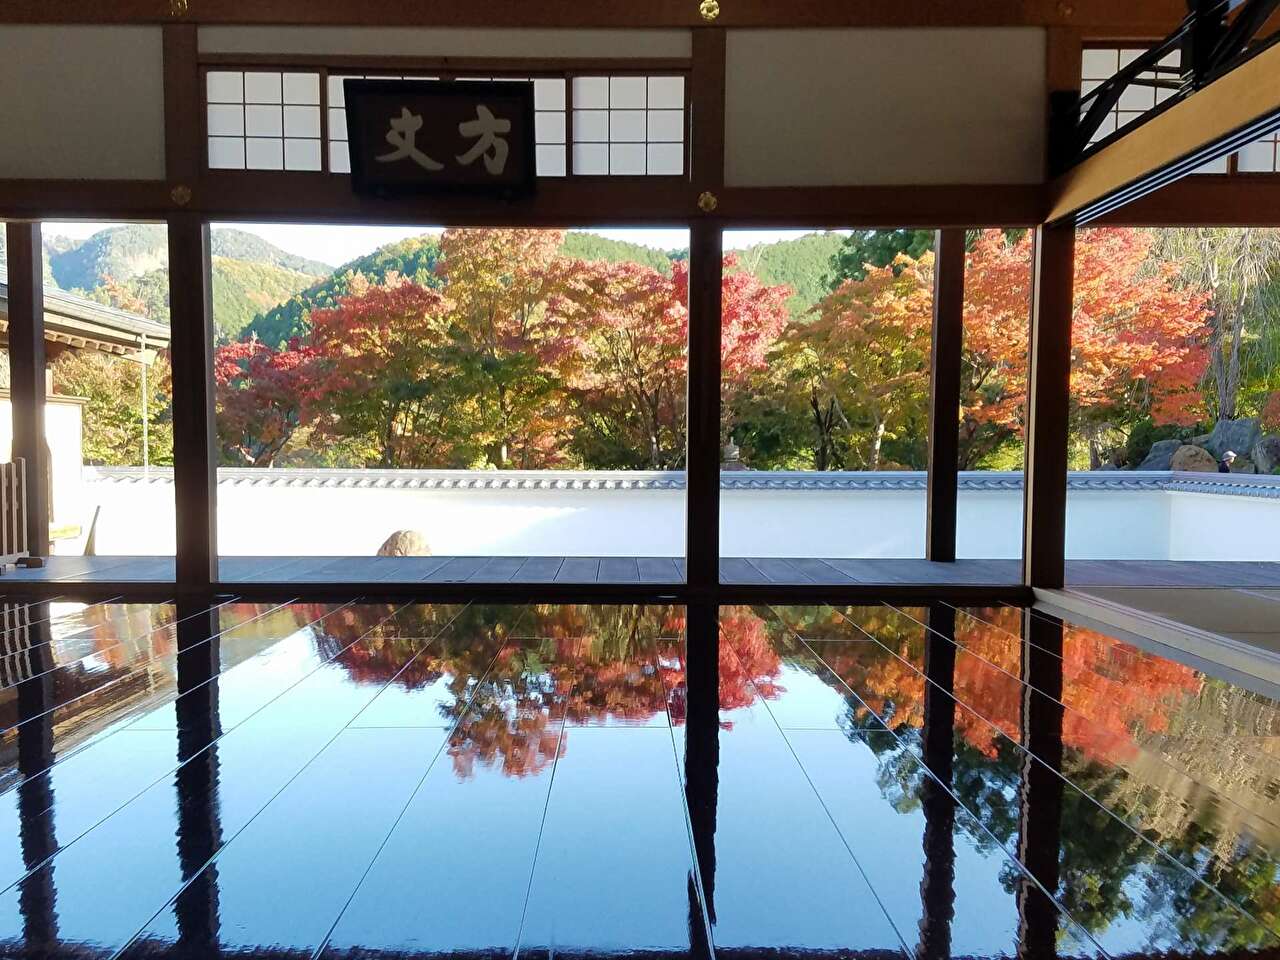 Reflection of Maple Trees on the floor in Hotokuji